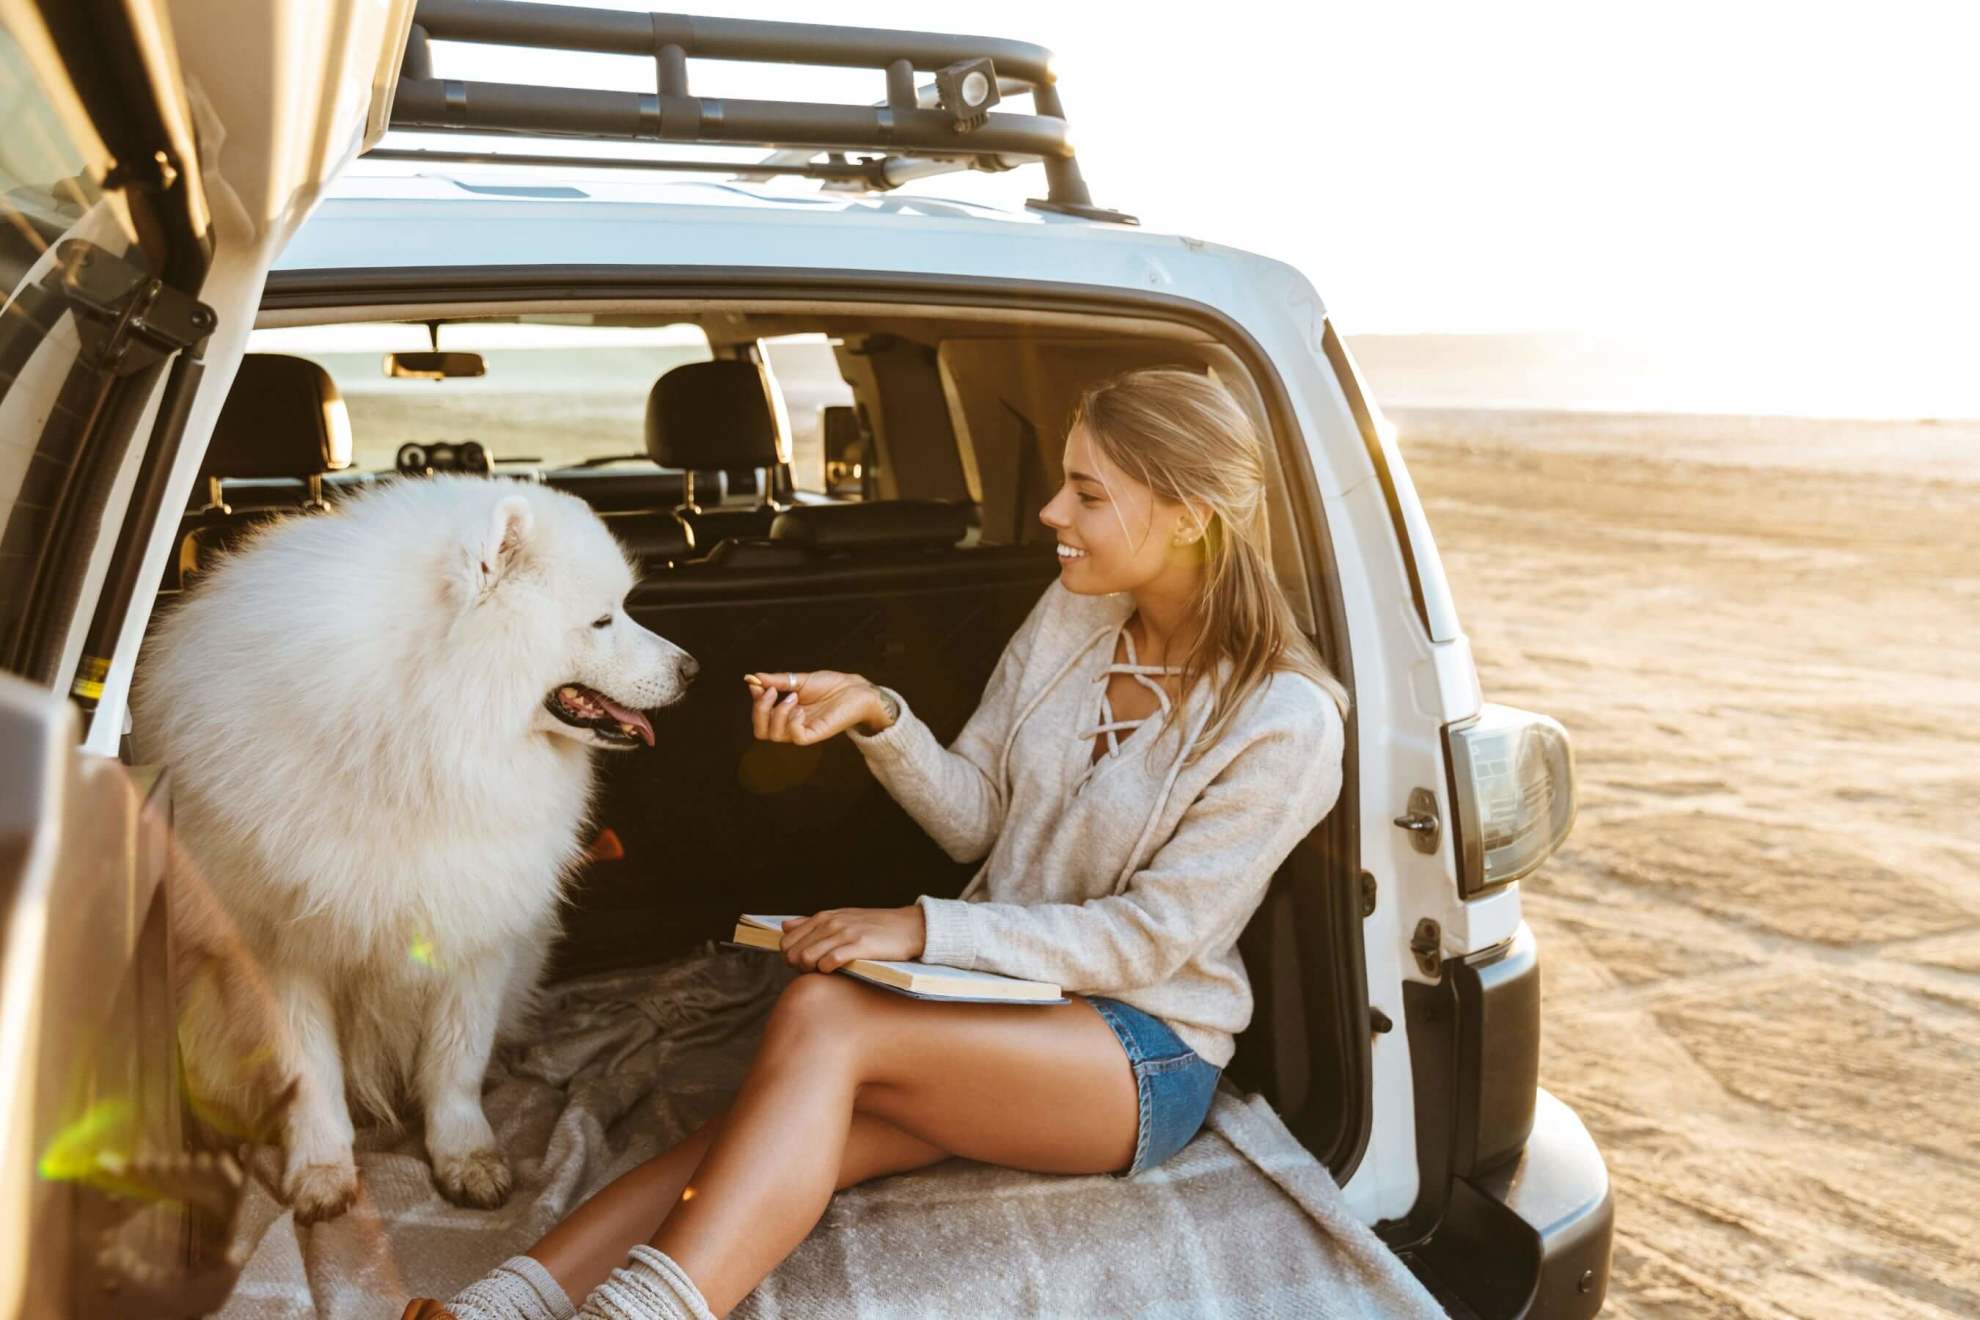 Dog and woman in back of jeep on beach